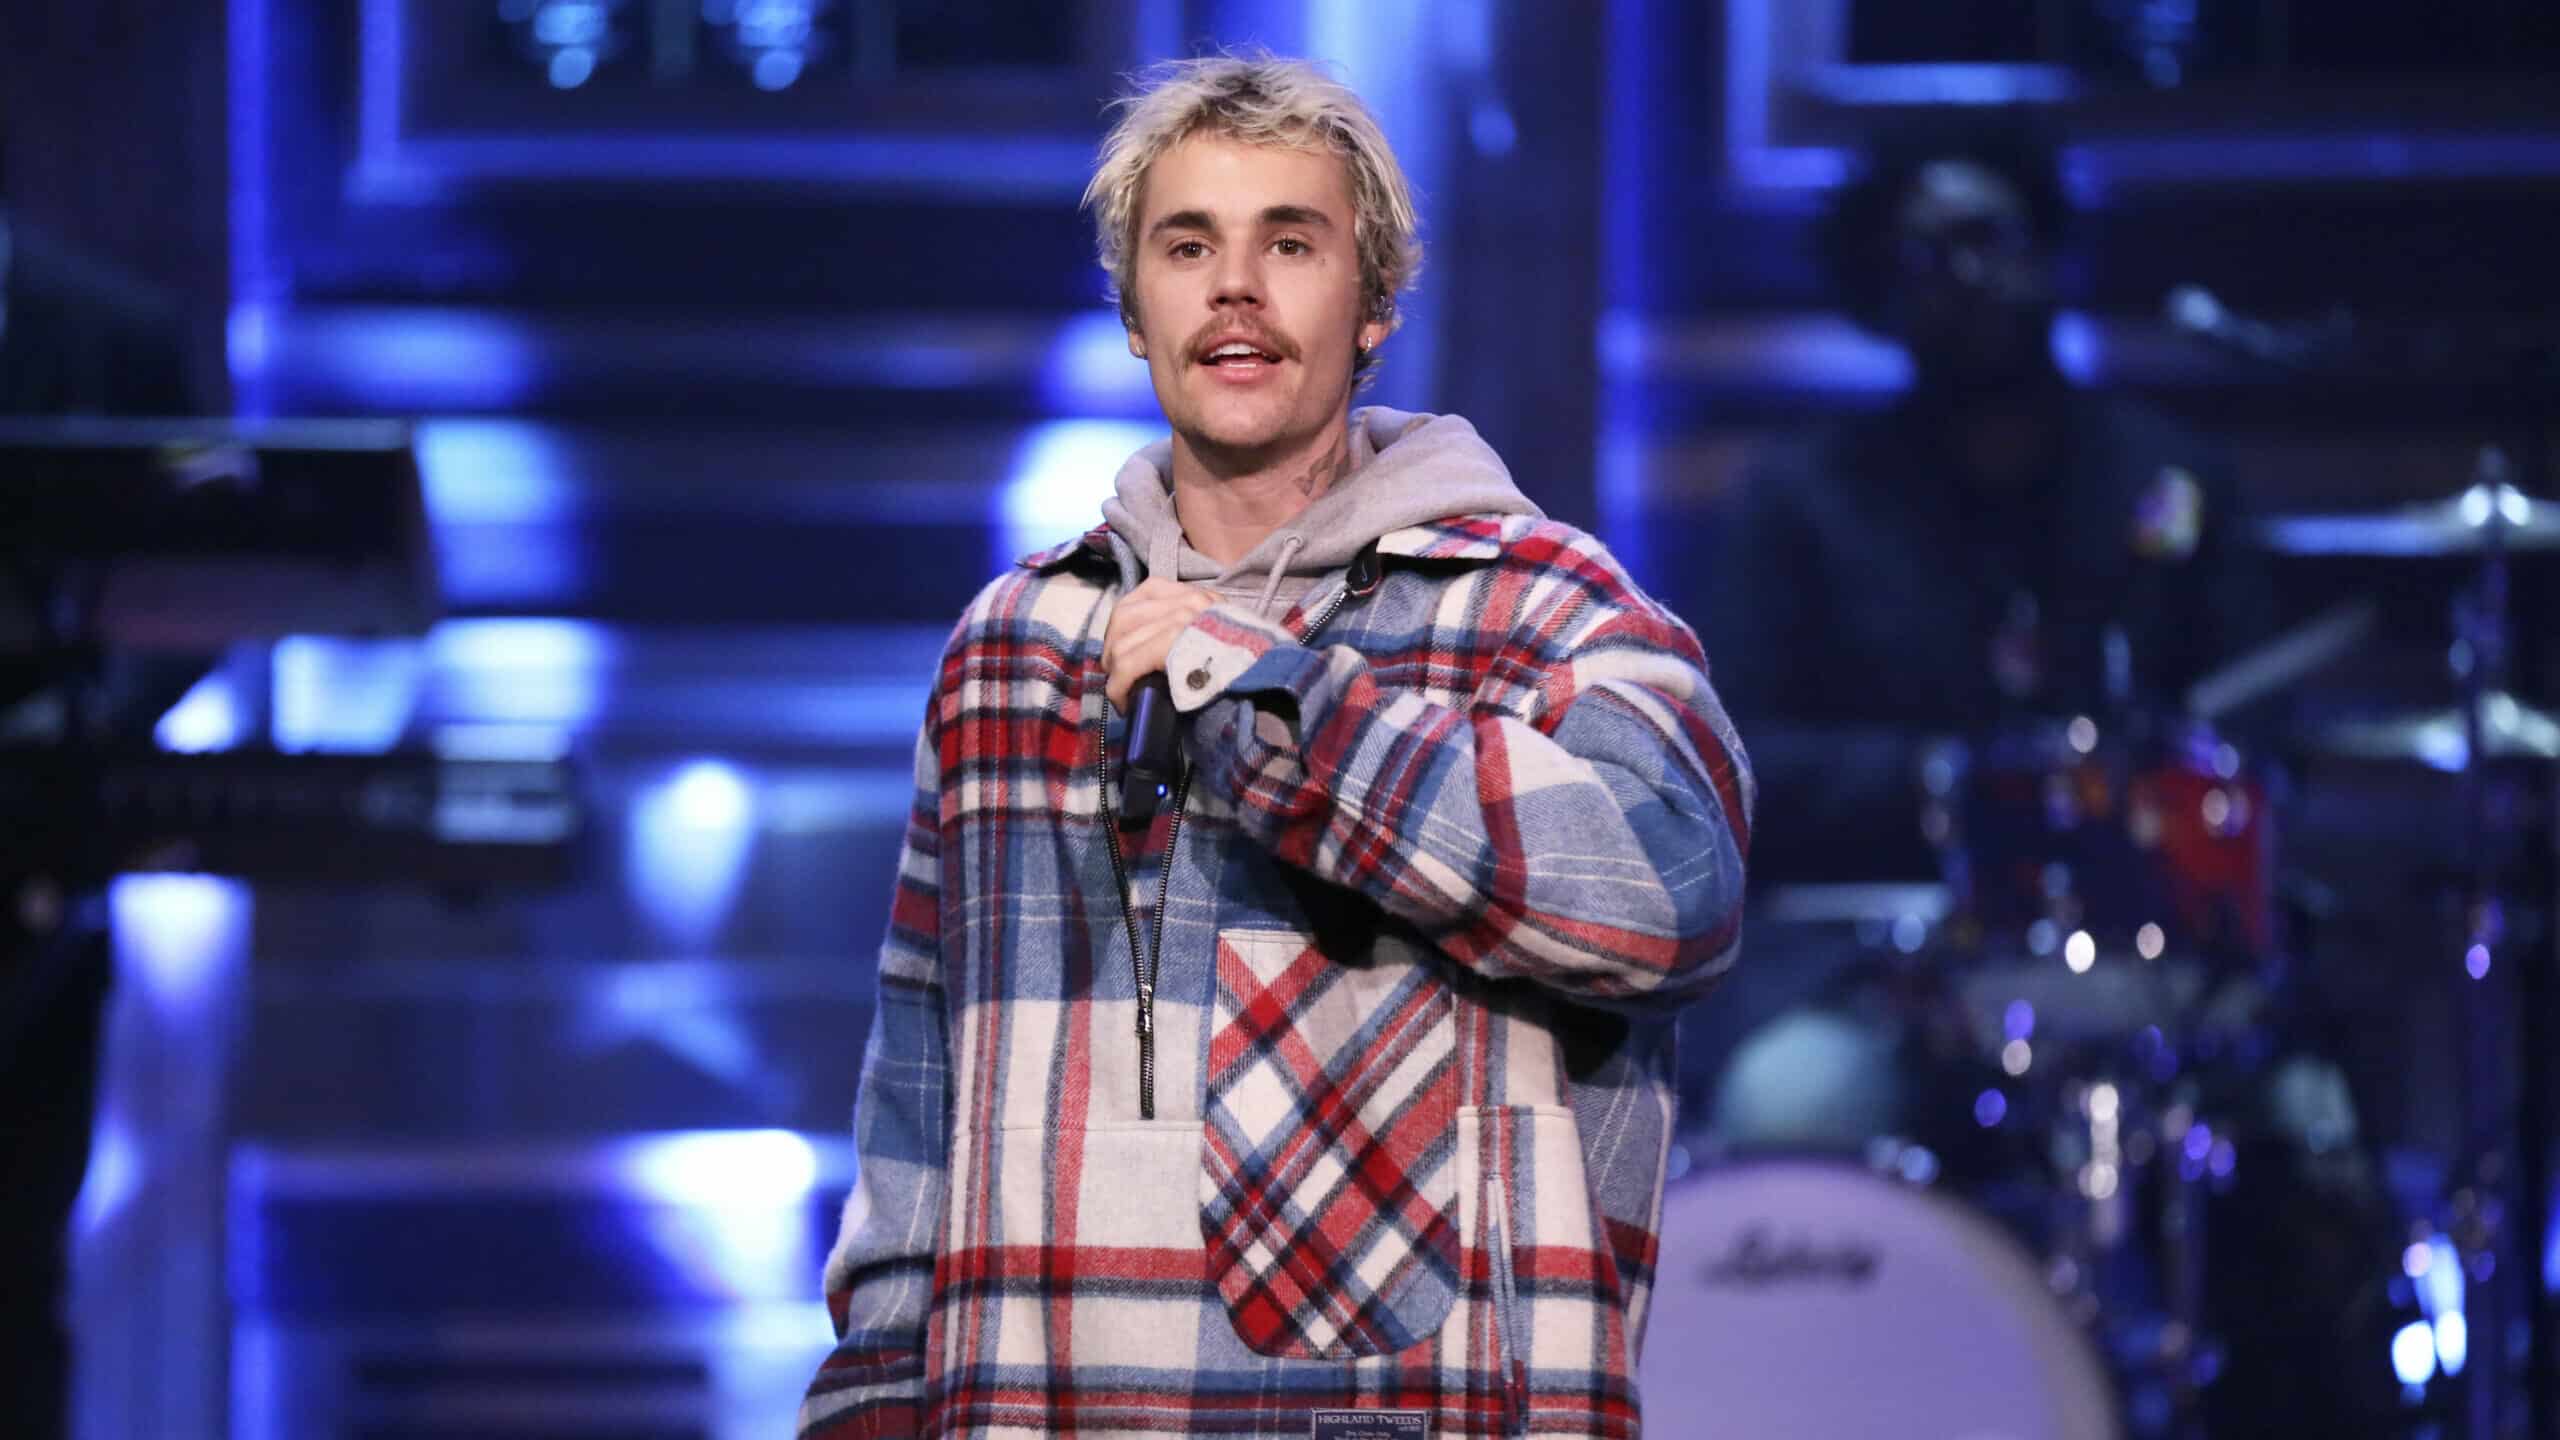 Justin Bieber Shares Update on Facial Mobility After Ramsay Hunt Syndrome  Diagnosis